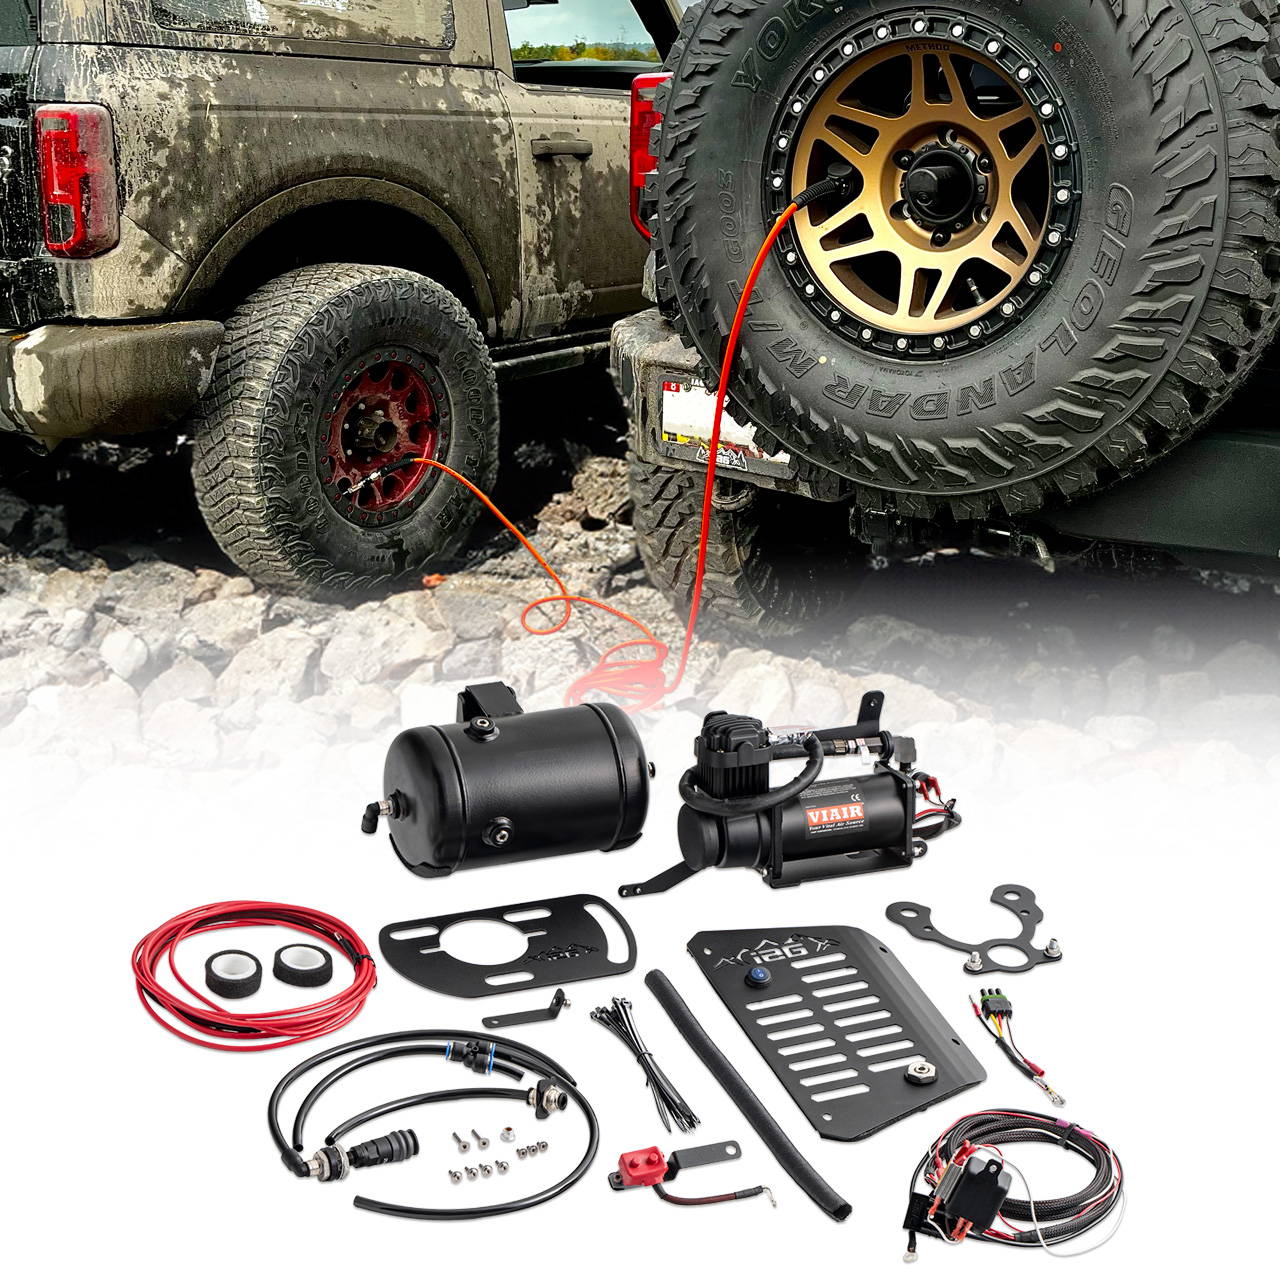 IAG’s Tailgate Air Compressor System For 2021+ Ford Bronco